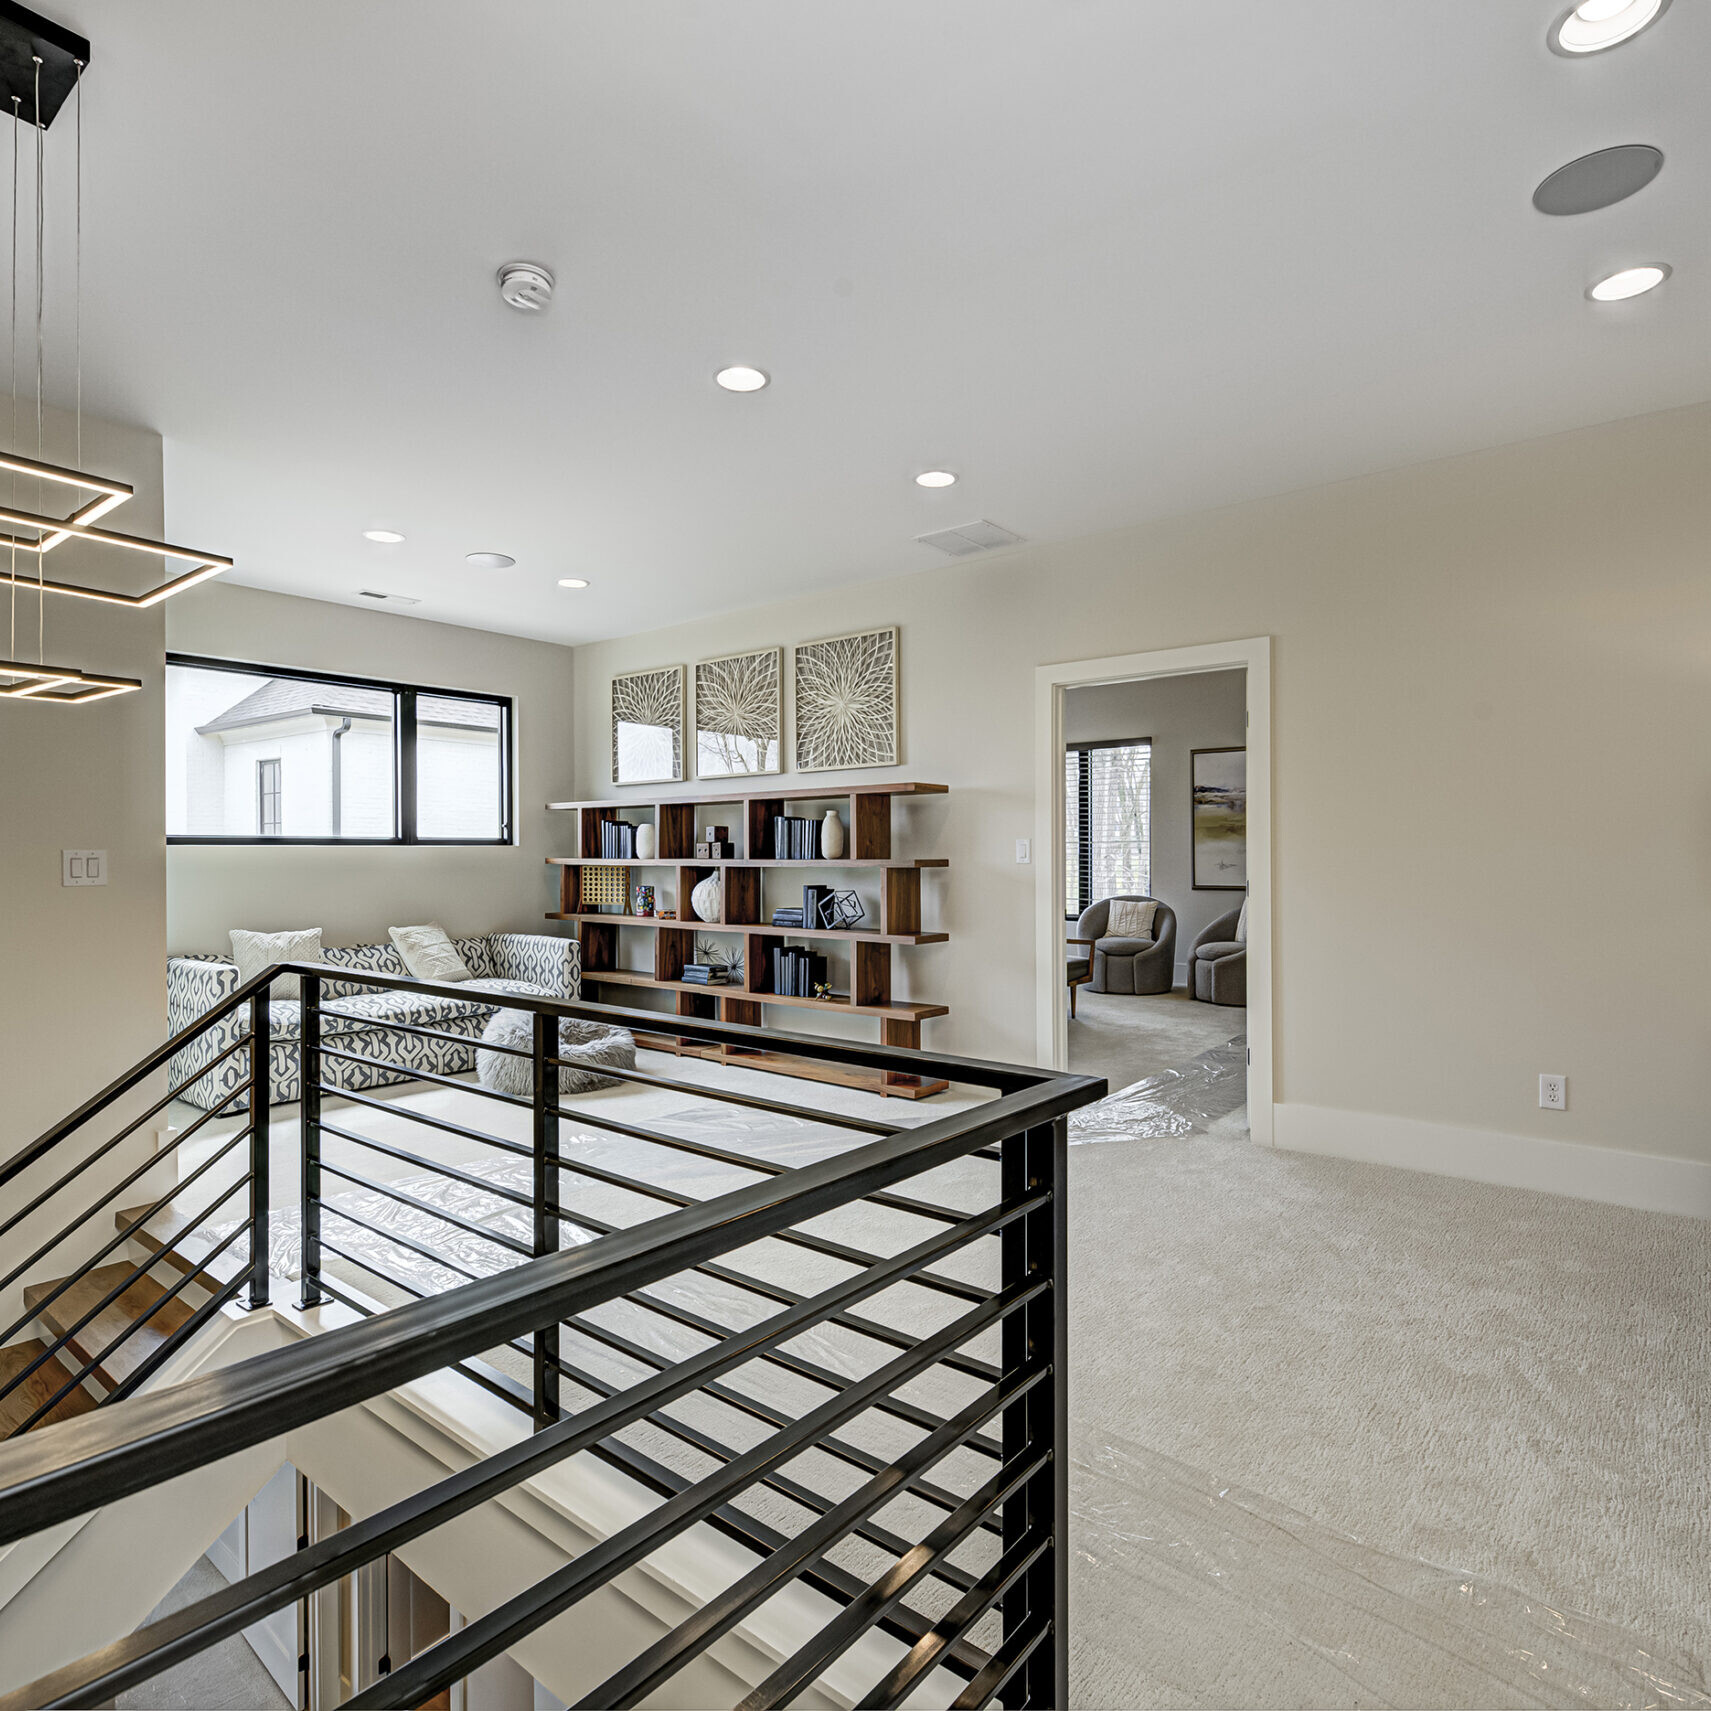 A modern home with a staircase and bookshelf.